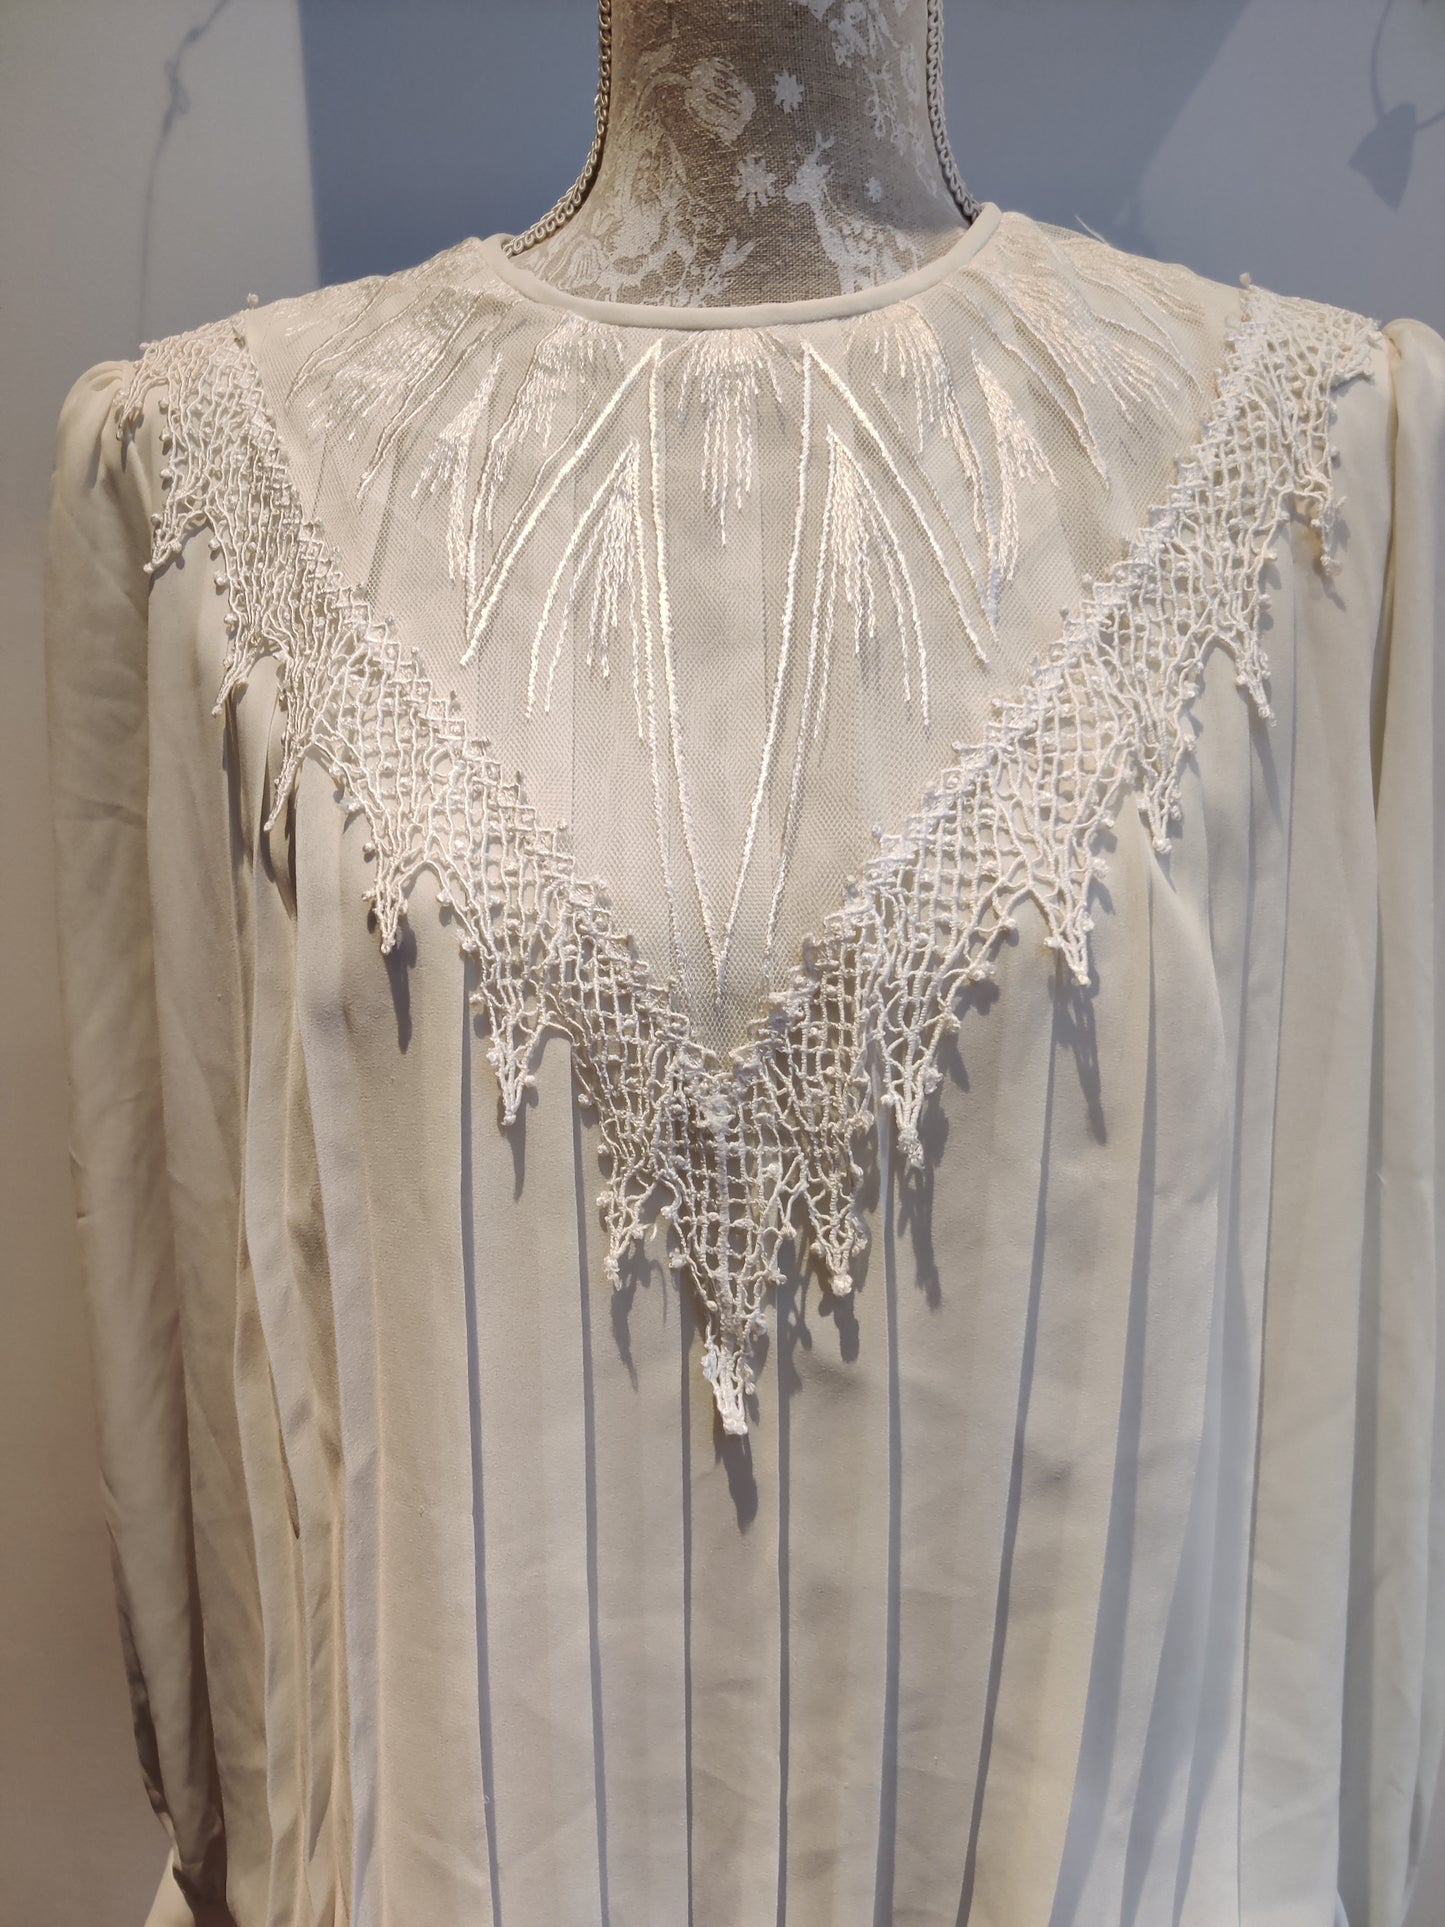 Cream 80s top with beautiful lace embroidery